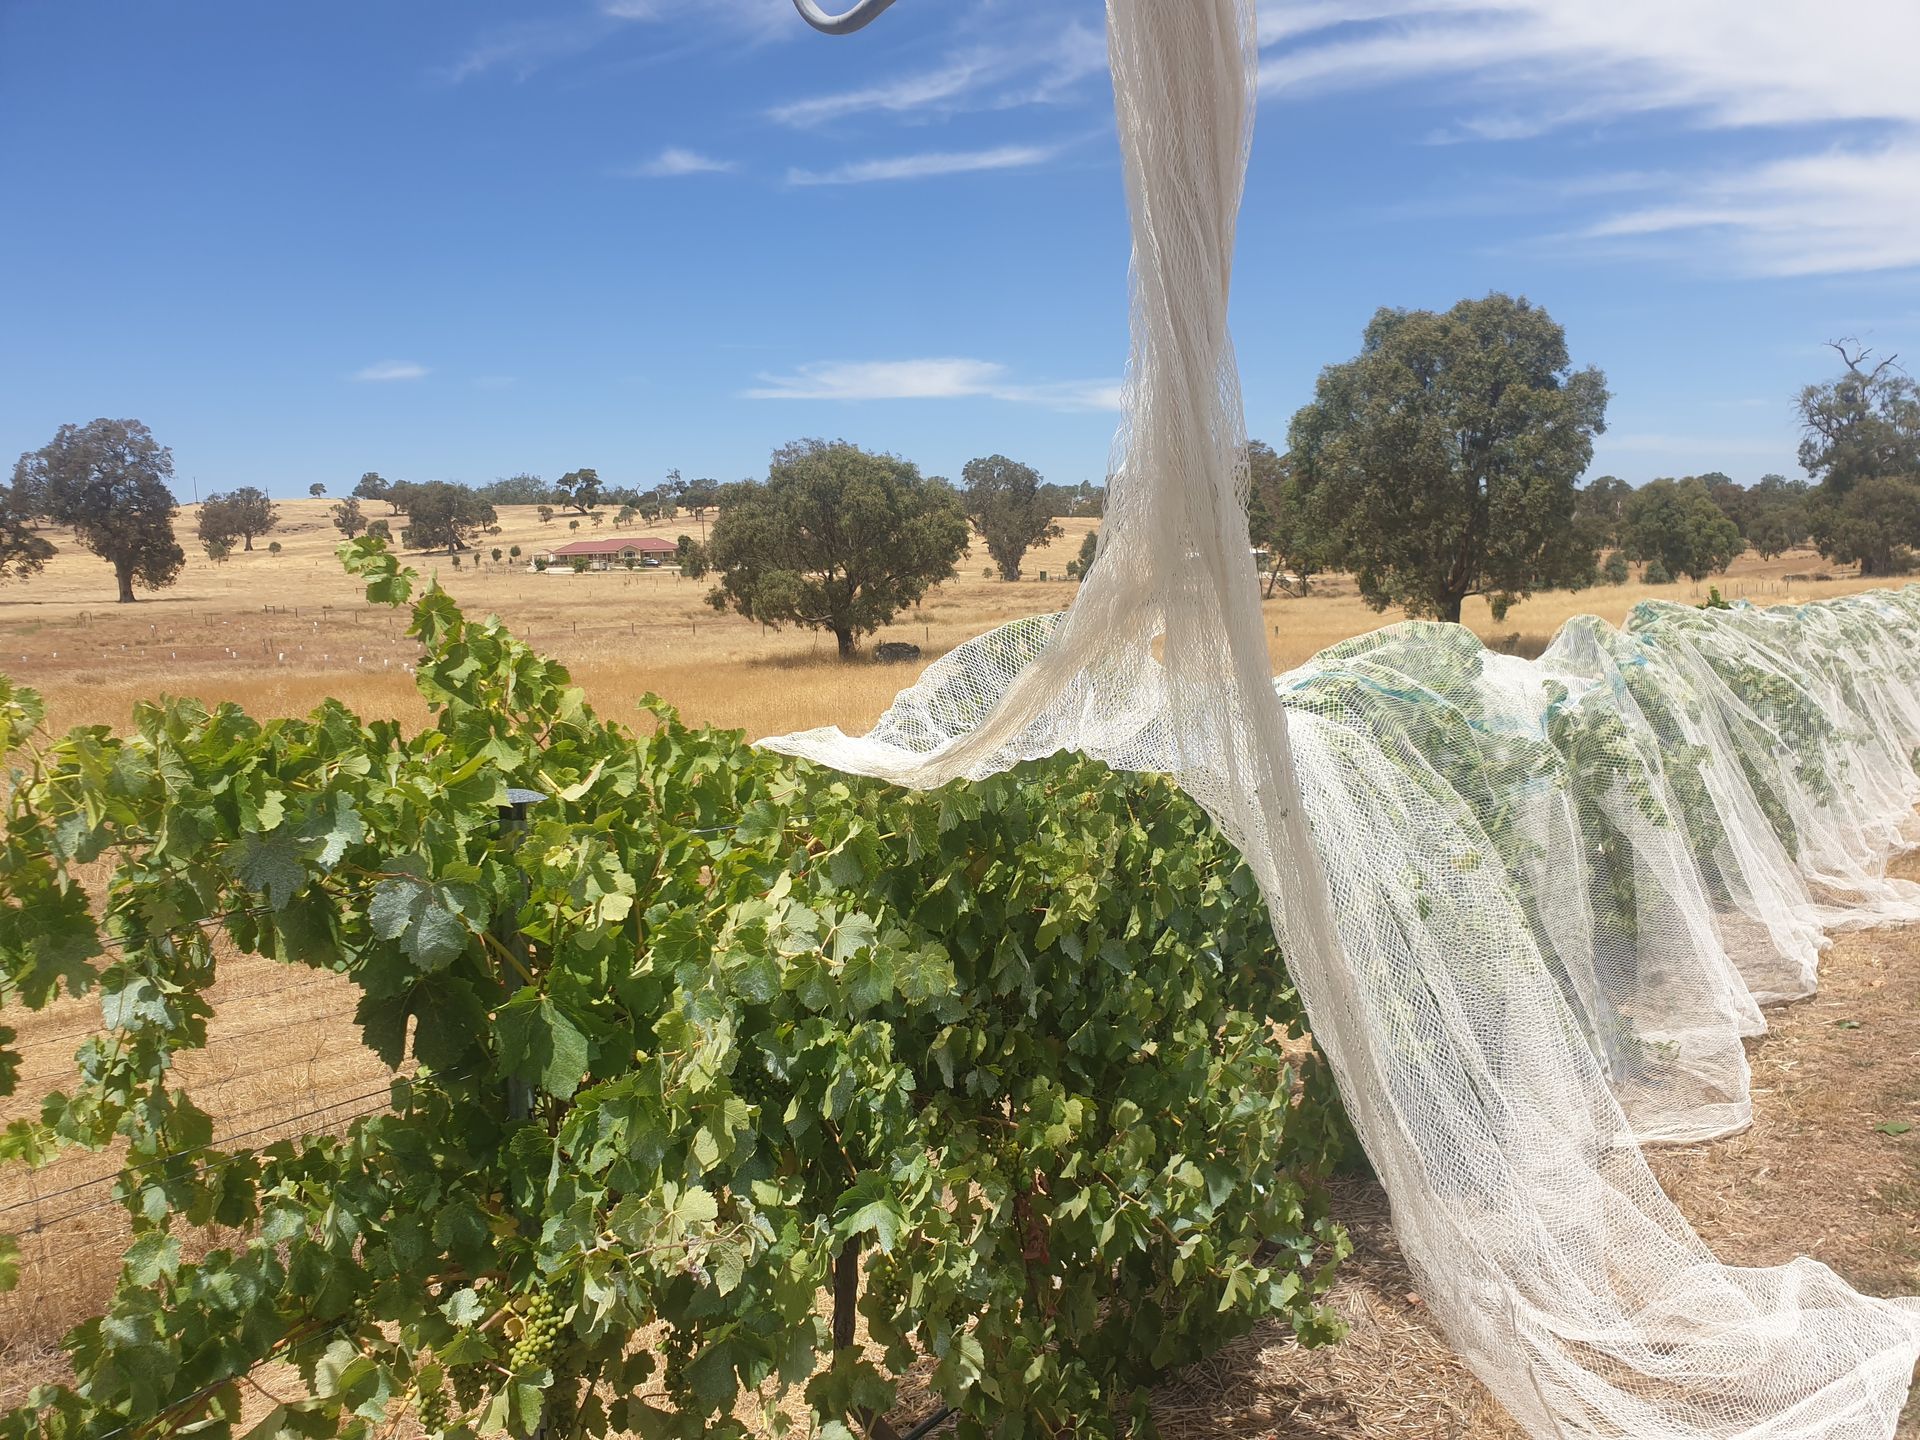 Shiraz vines netted for protection from birds